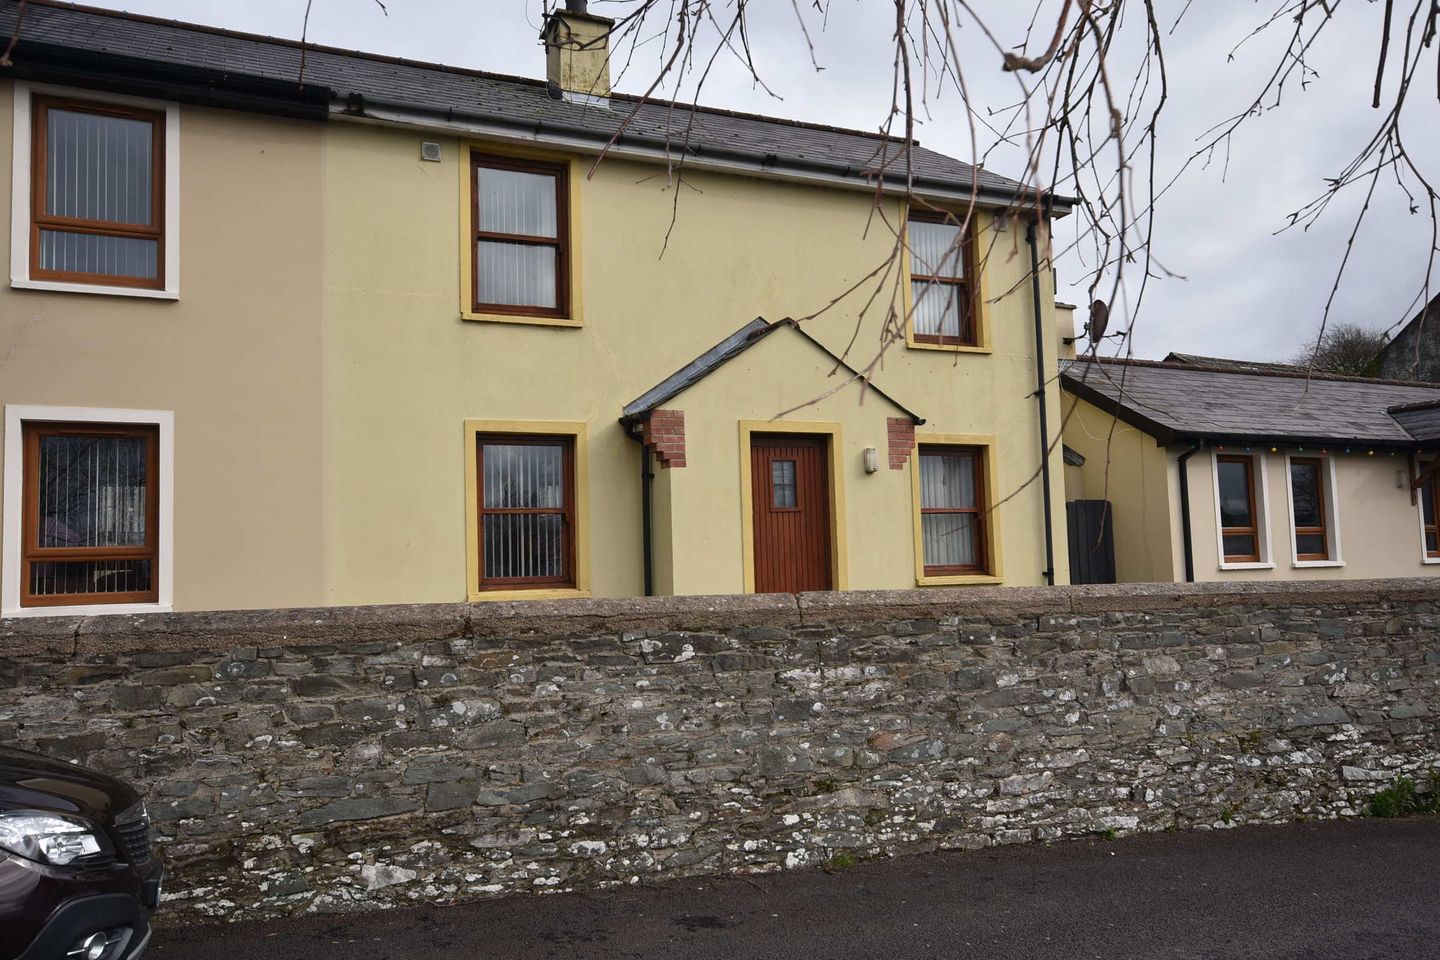 2 Main Street, Carrigans, Co. Donegal, F93Y19D